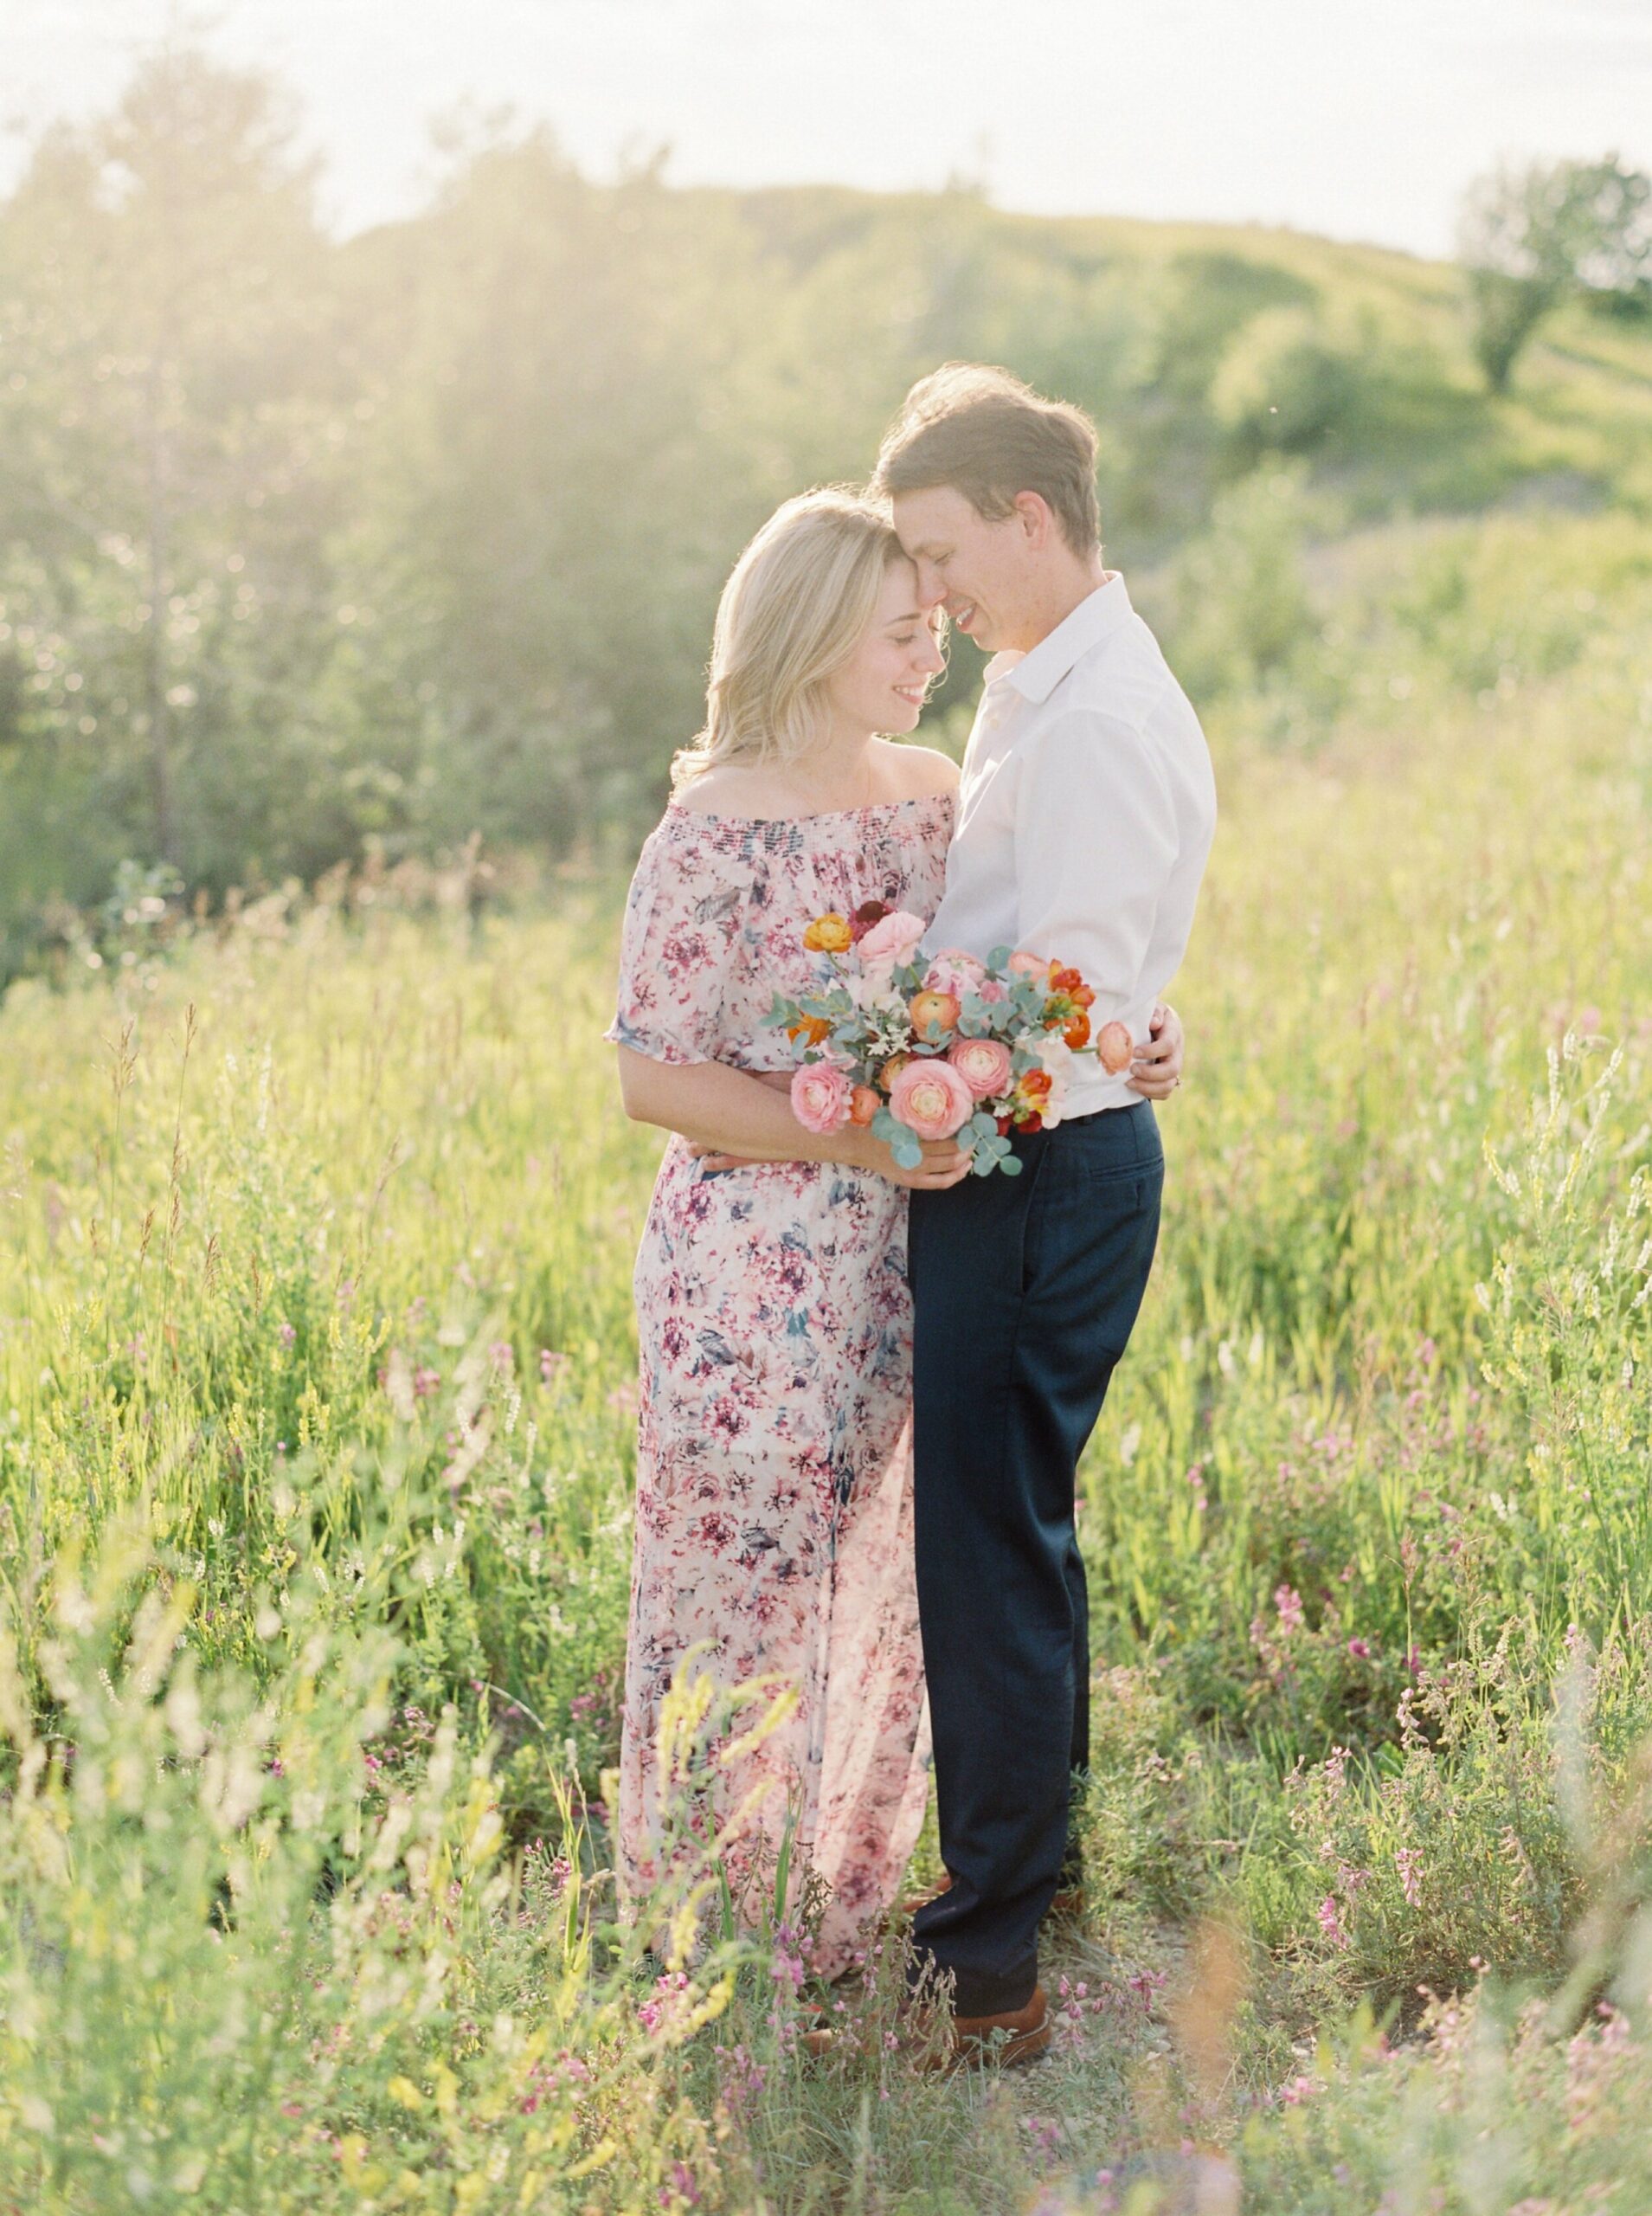  engagement session outfit inspiration floral maxi dress | nose hill park calgary summer engagement session | calgary fine art film wedding & engagement photographer justine milton 